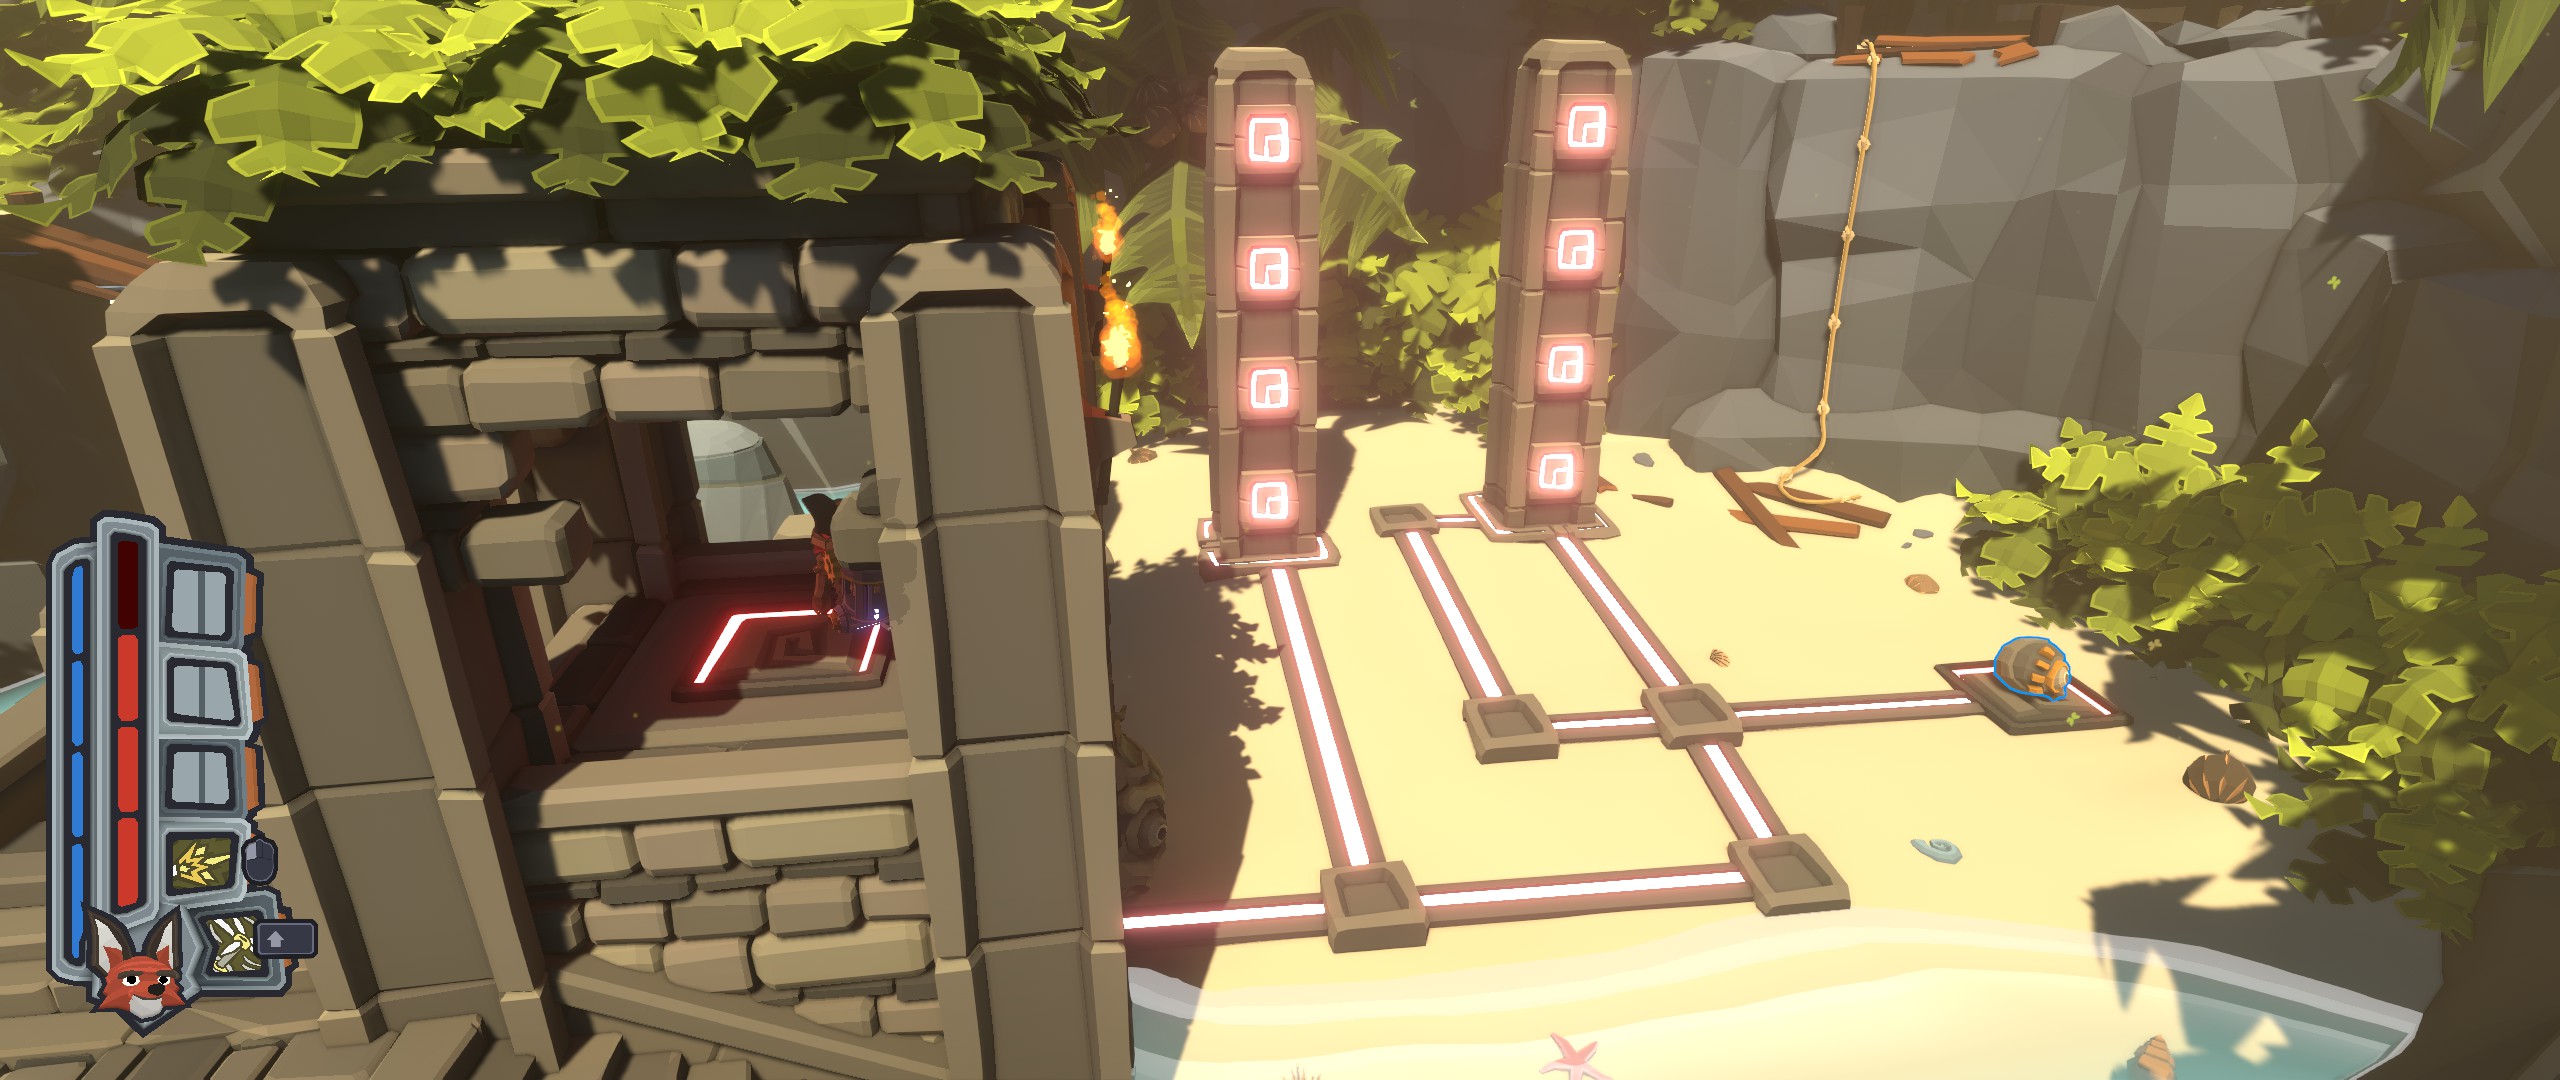 An example of a circuit puzzle where you must change the pillars heights in order to reach a high ledge